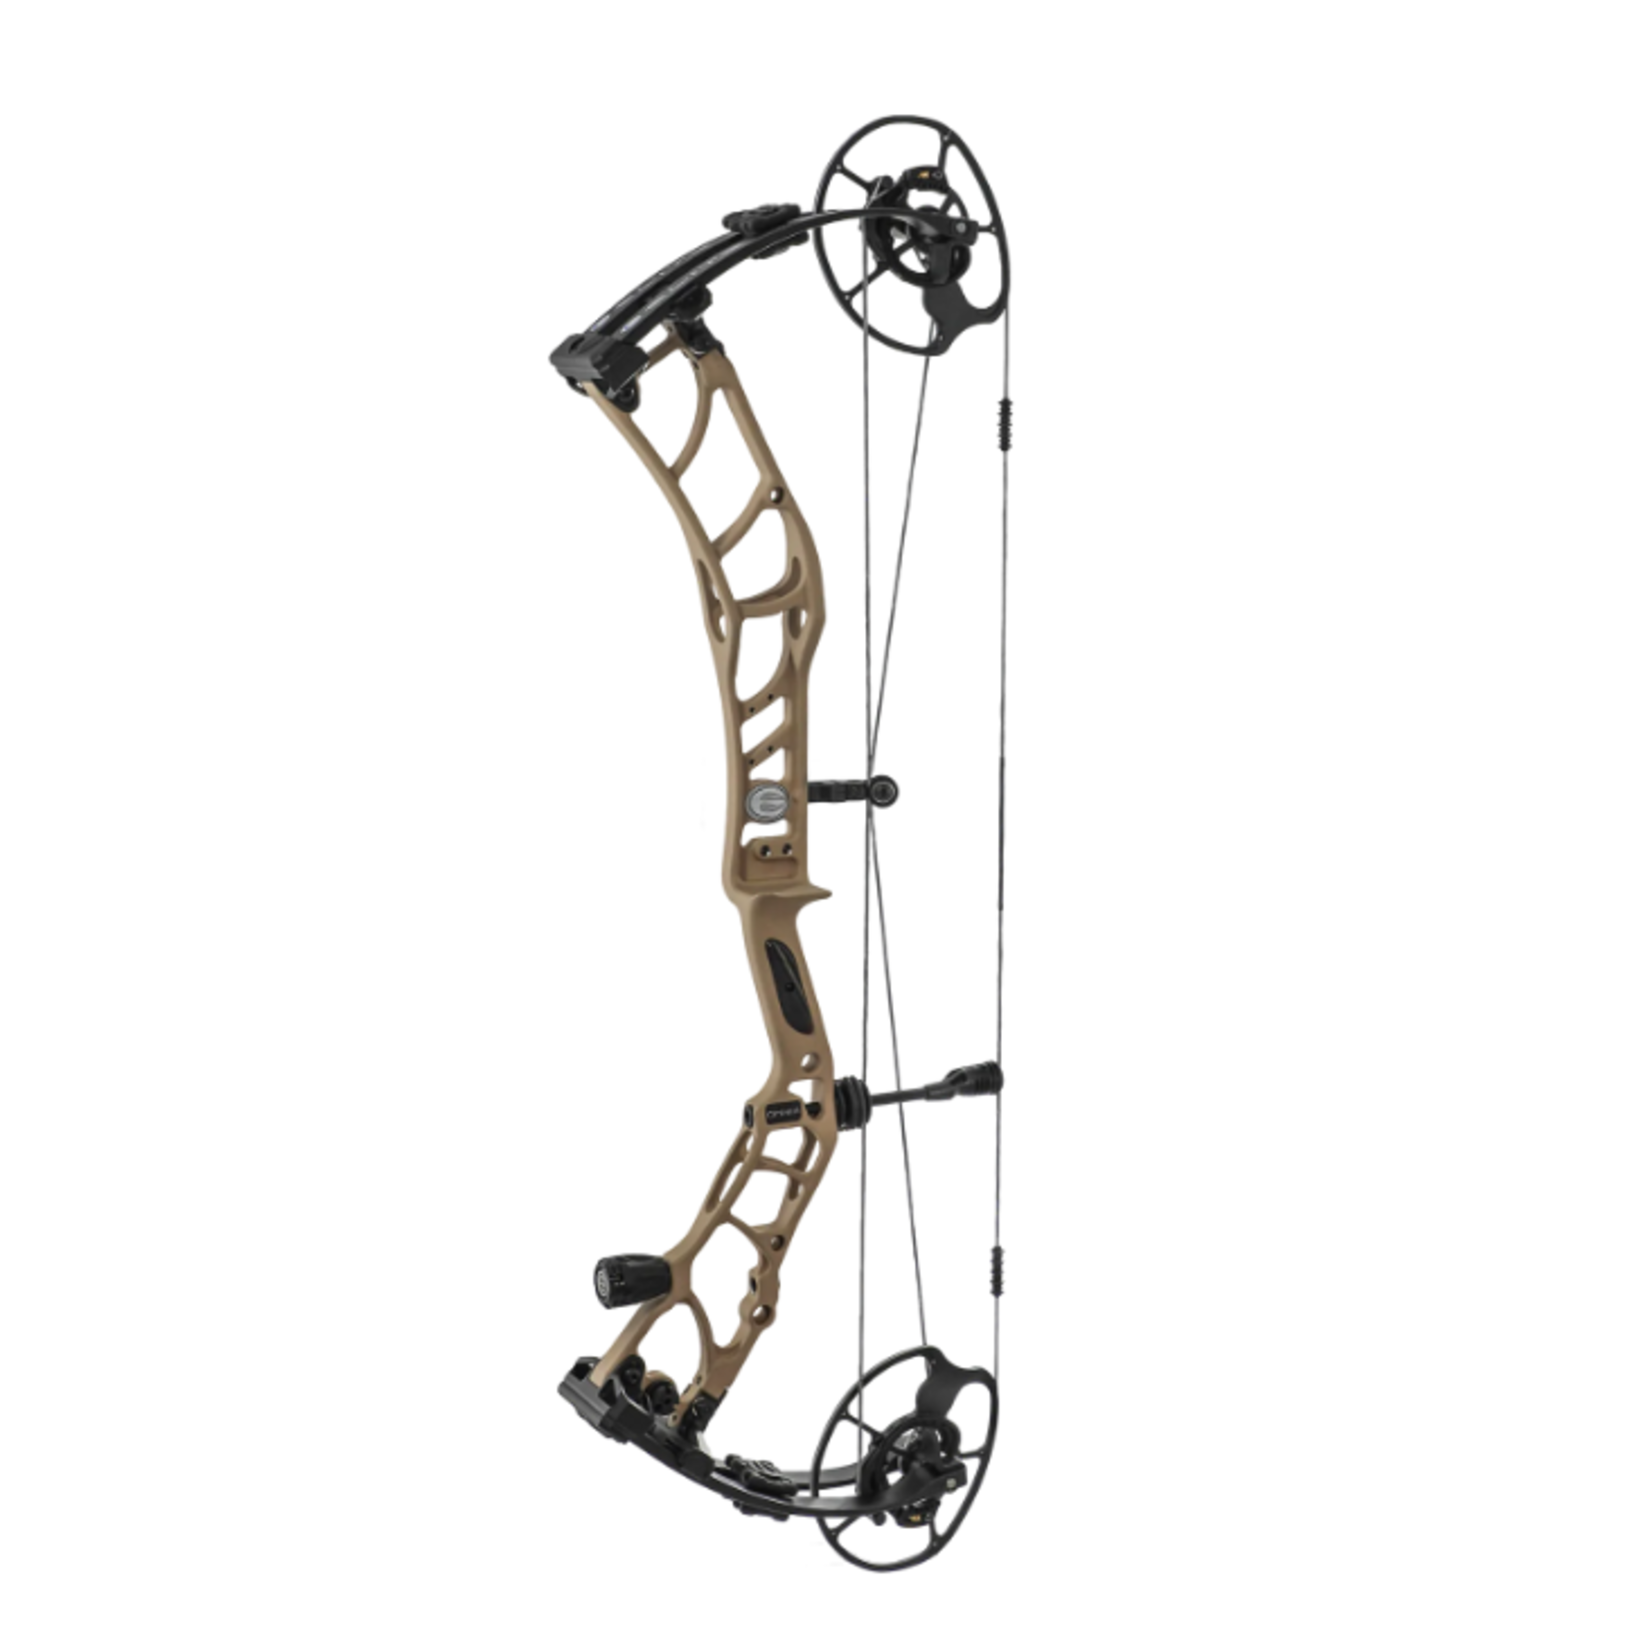 ELITE OMNIA COMPOUND HUNTING BOW